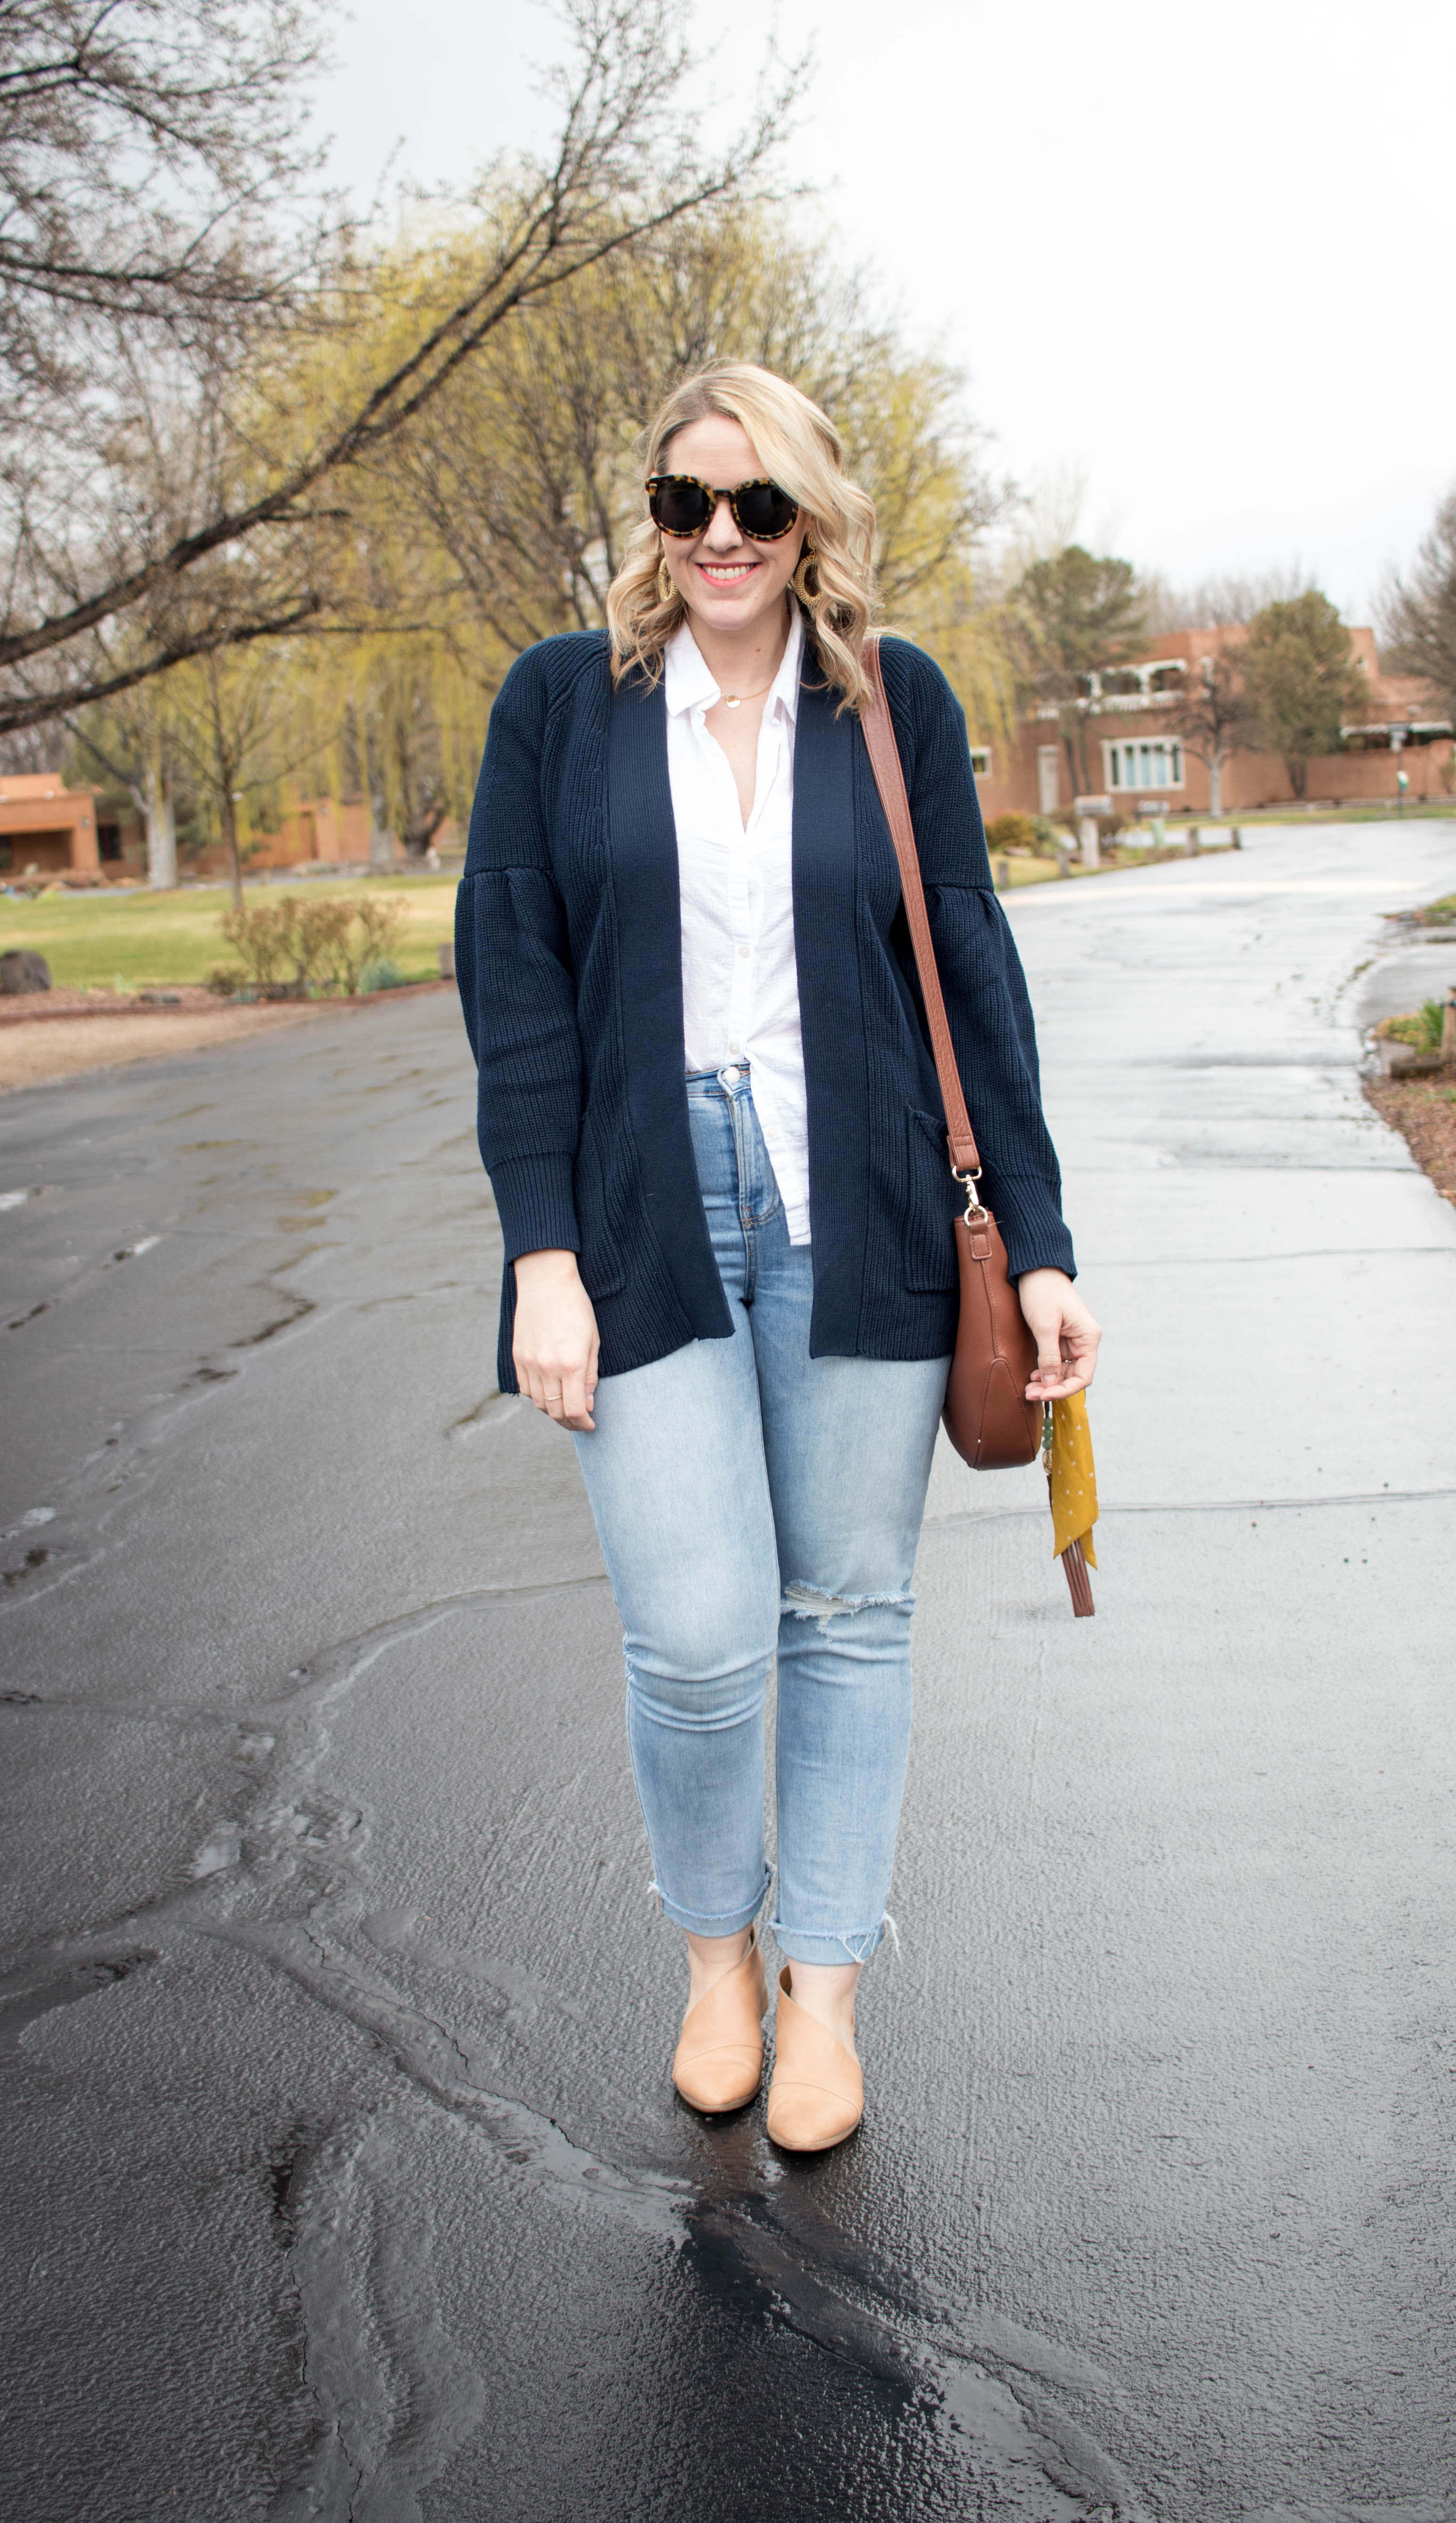 winter to spring layers transitional outfit #springstyle #styleblogger #theweeklystyleedit